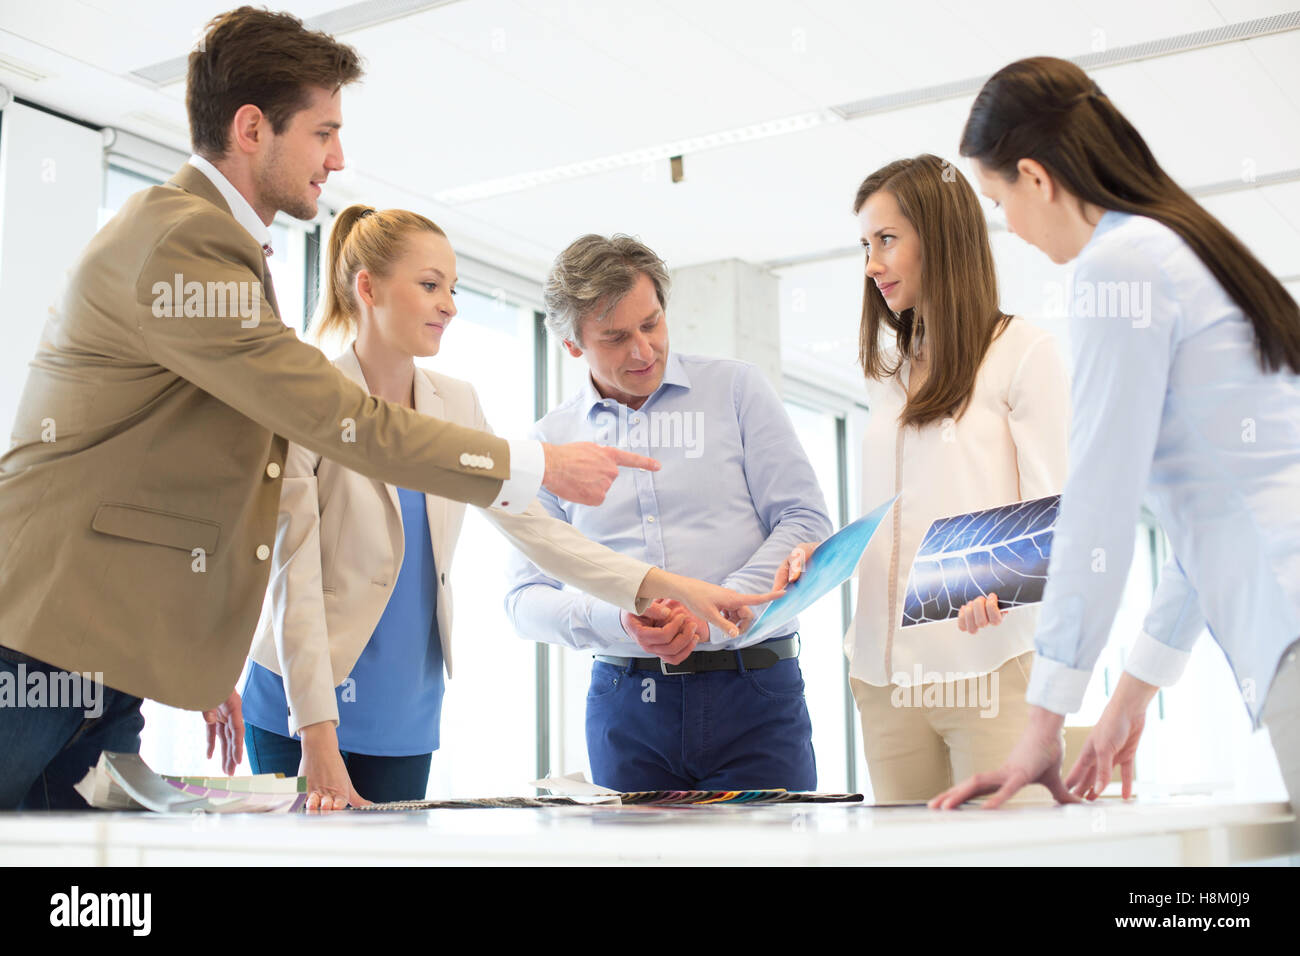 Male design professional with team discussing at table in new office Stock Photo